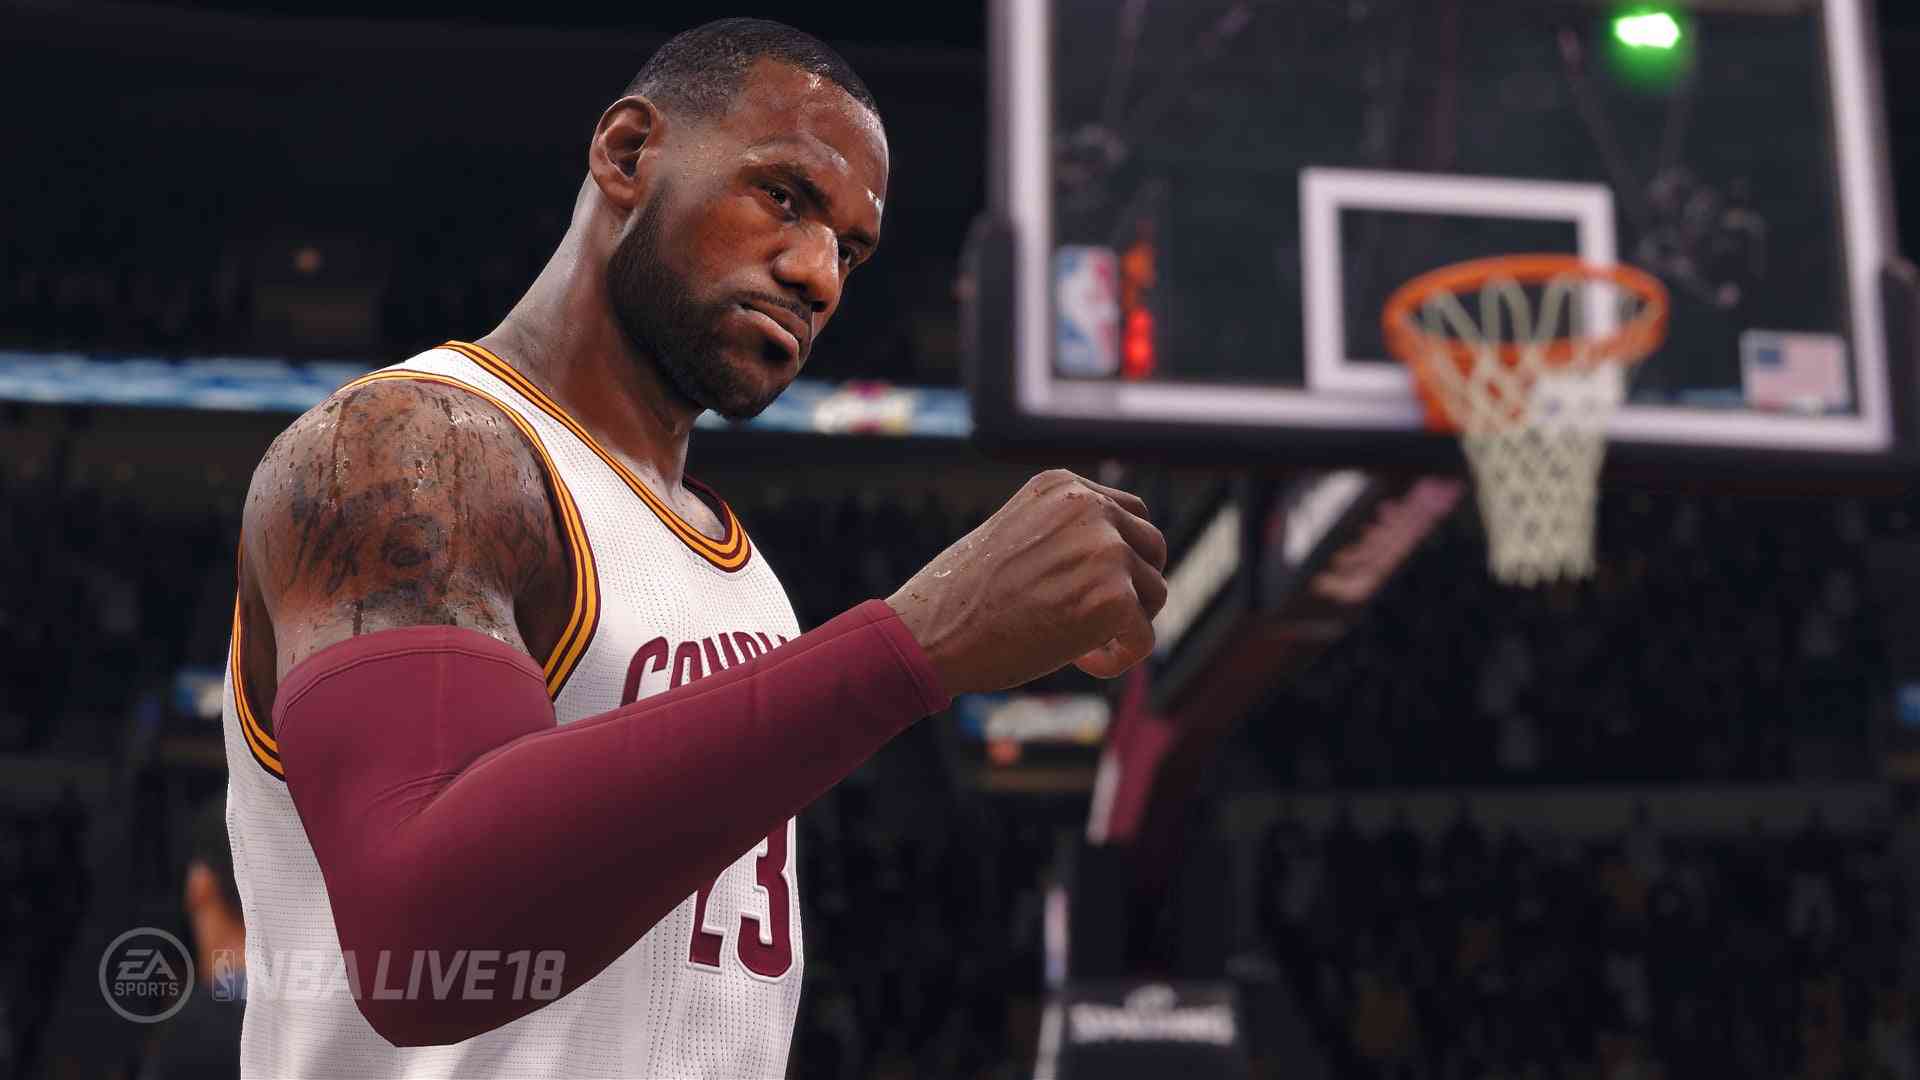 NBA Live 19 Gets an Official First Look Trailer and Release Date at E3